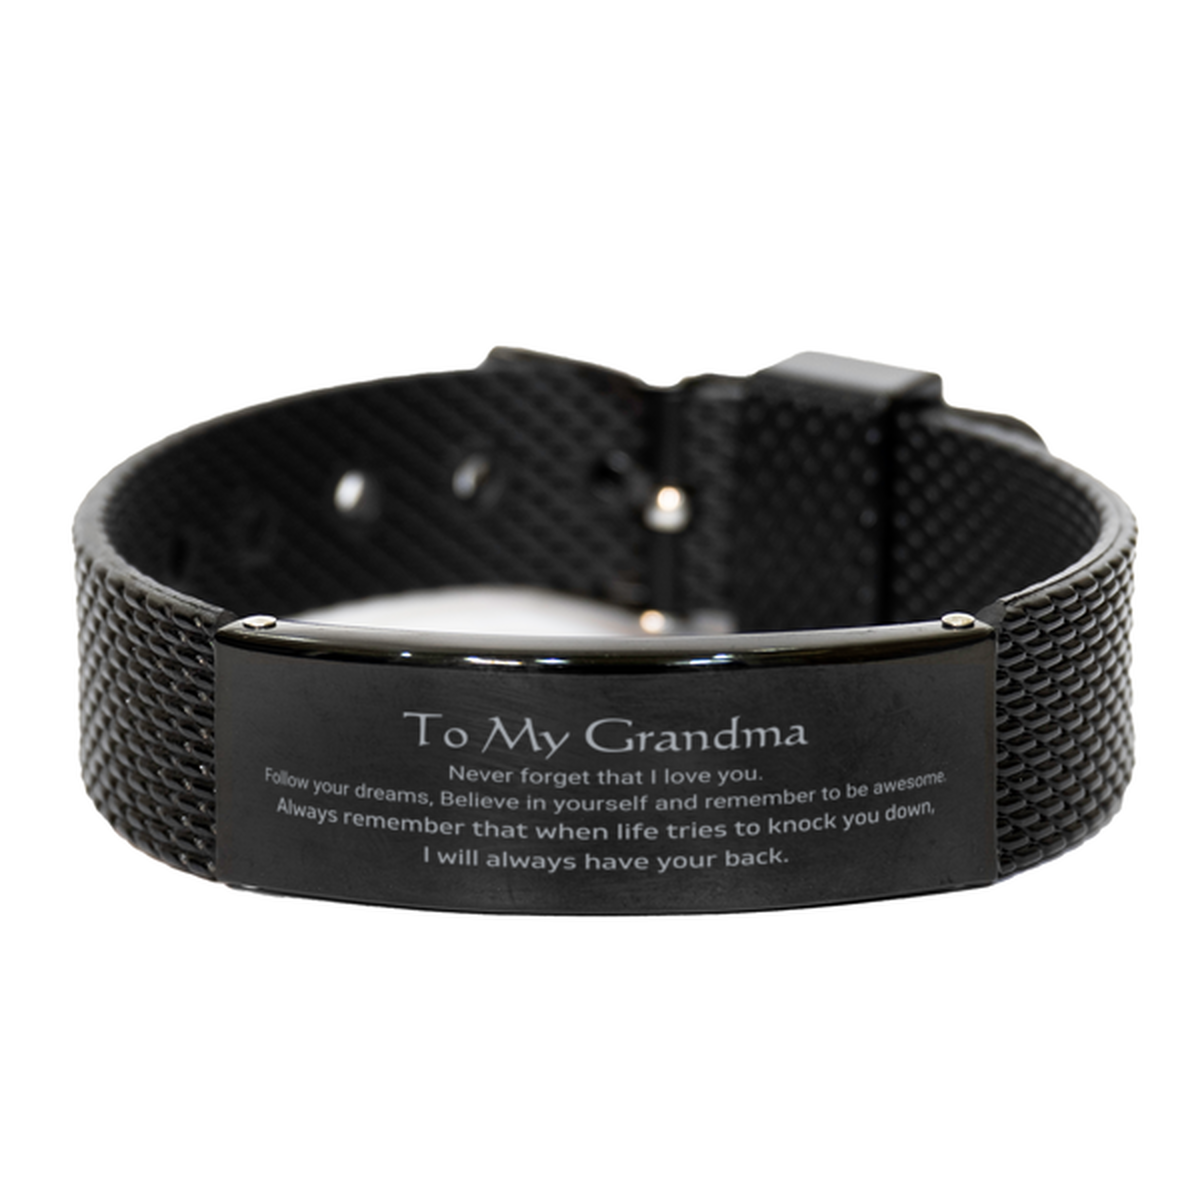 Inspirational Gifts for Grandma, Follow your dreams, Believe in yourself, Grandma Black Shark Mesh Bracelet, Birthday Christmas Unique Gifts For Grandma